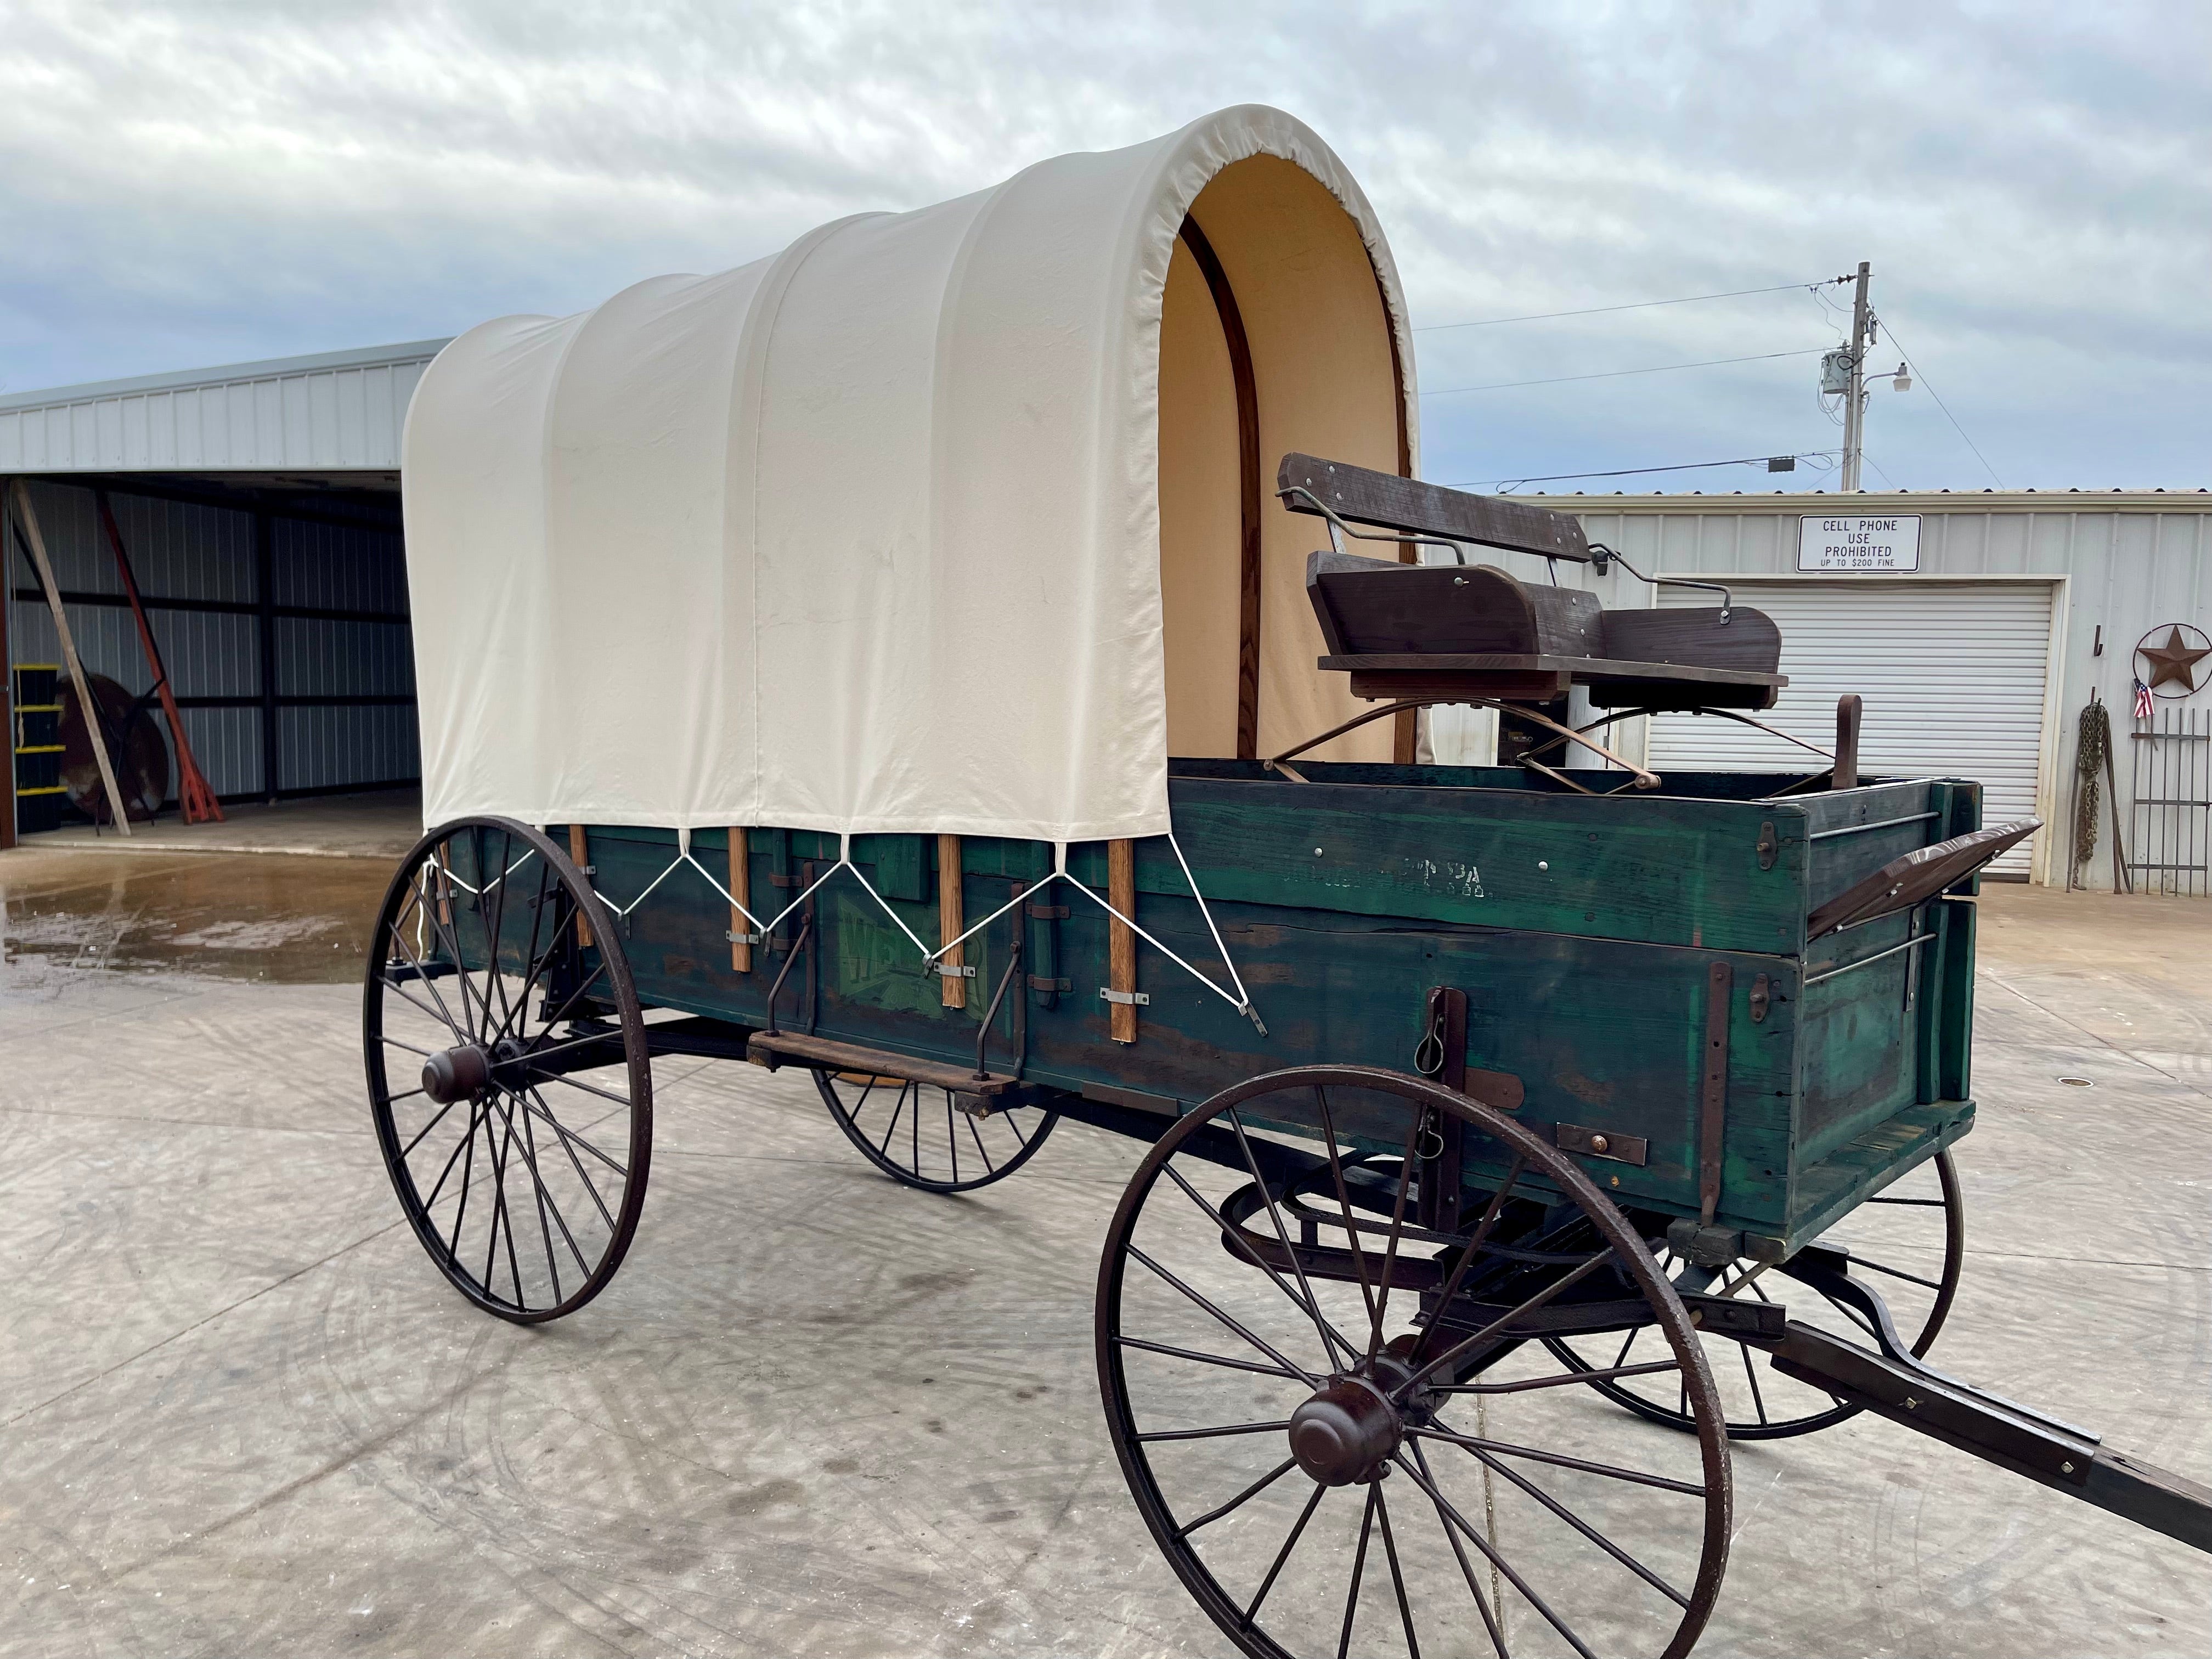 SOLD*Antique Weber Covered Wagon